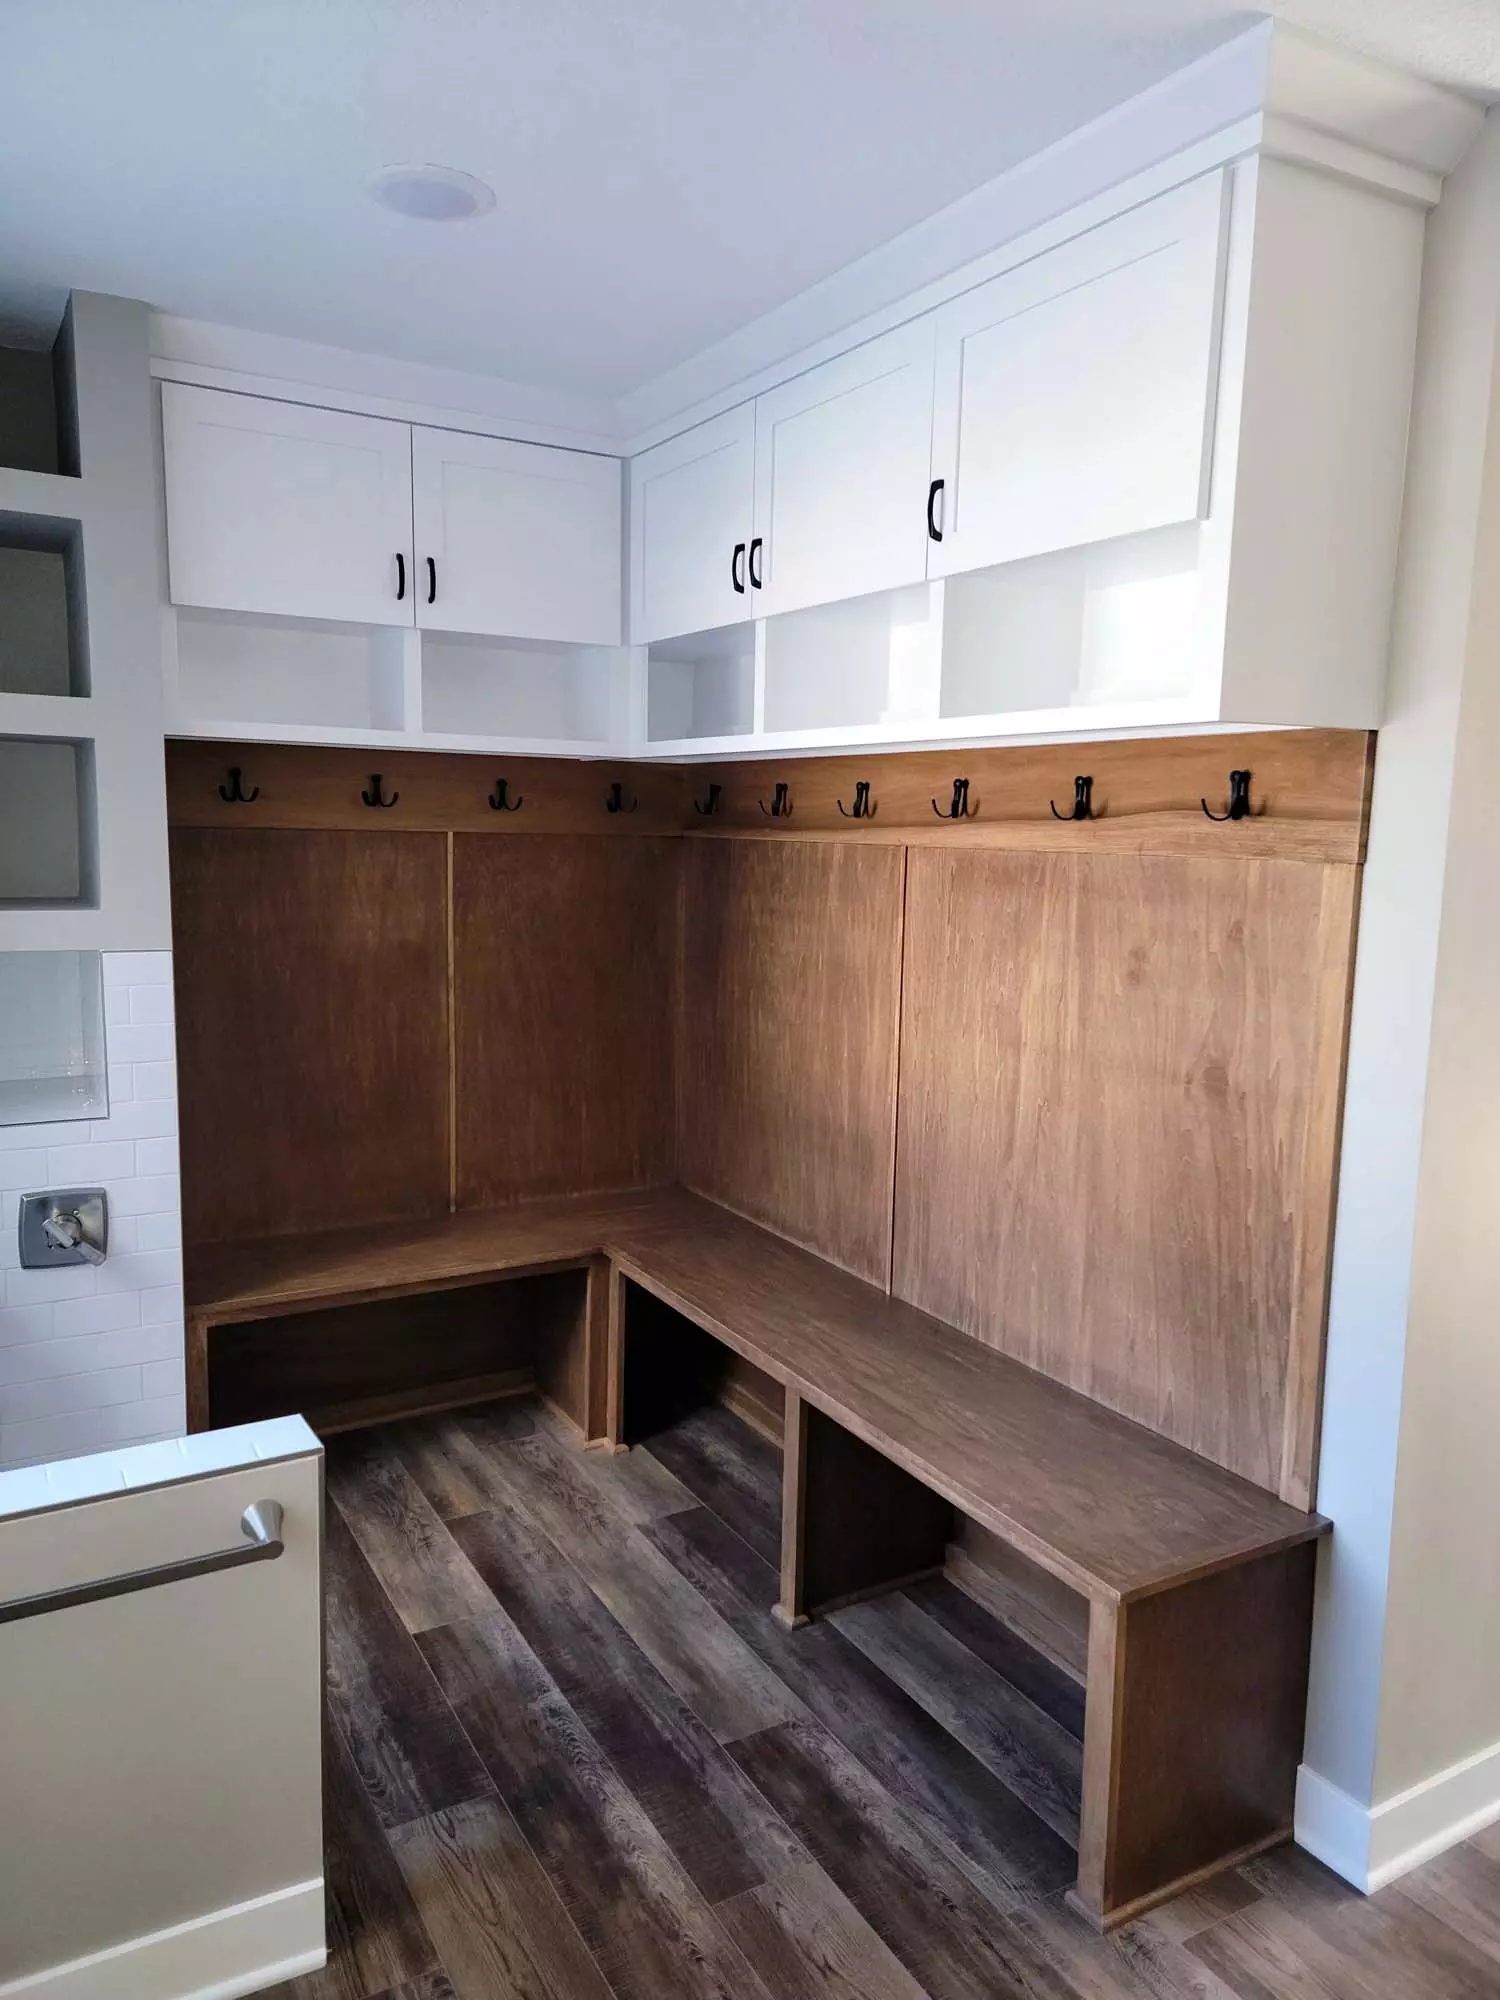 Mudroom w/ all kinds of storage